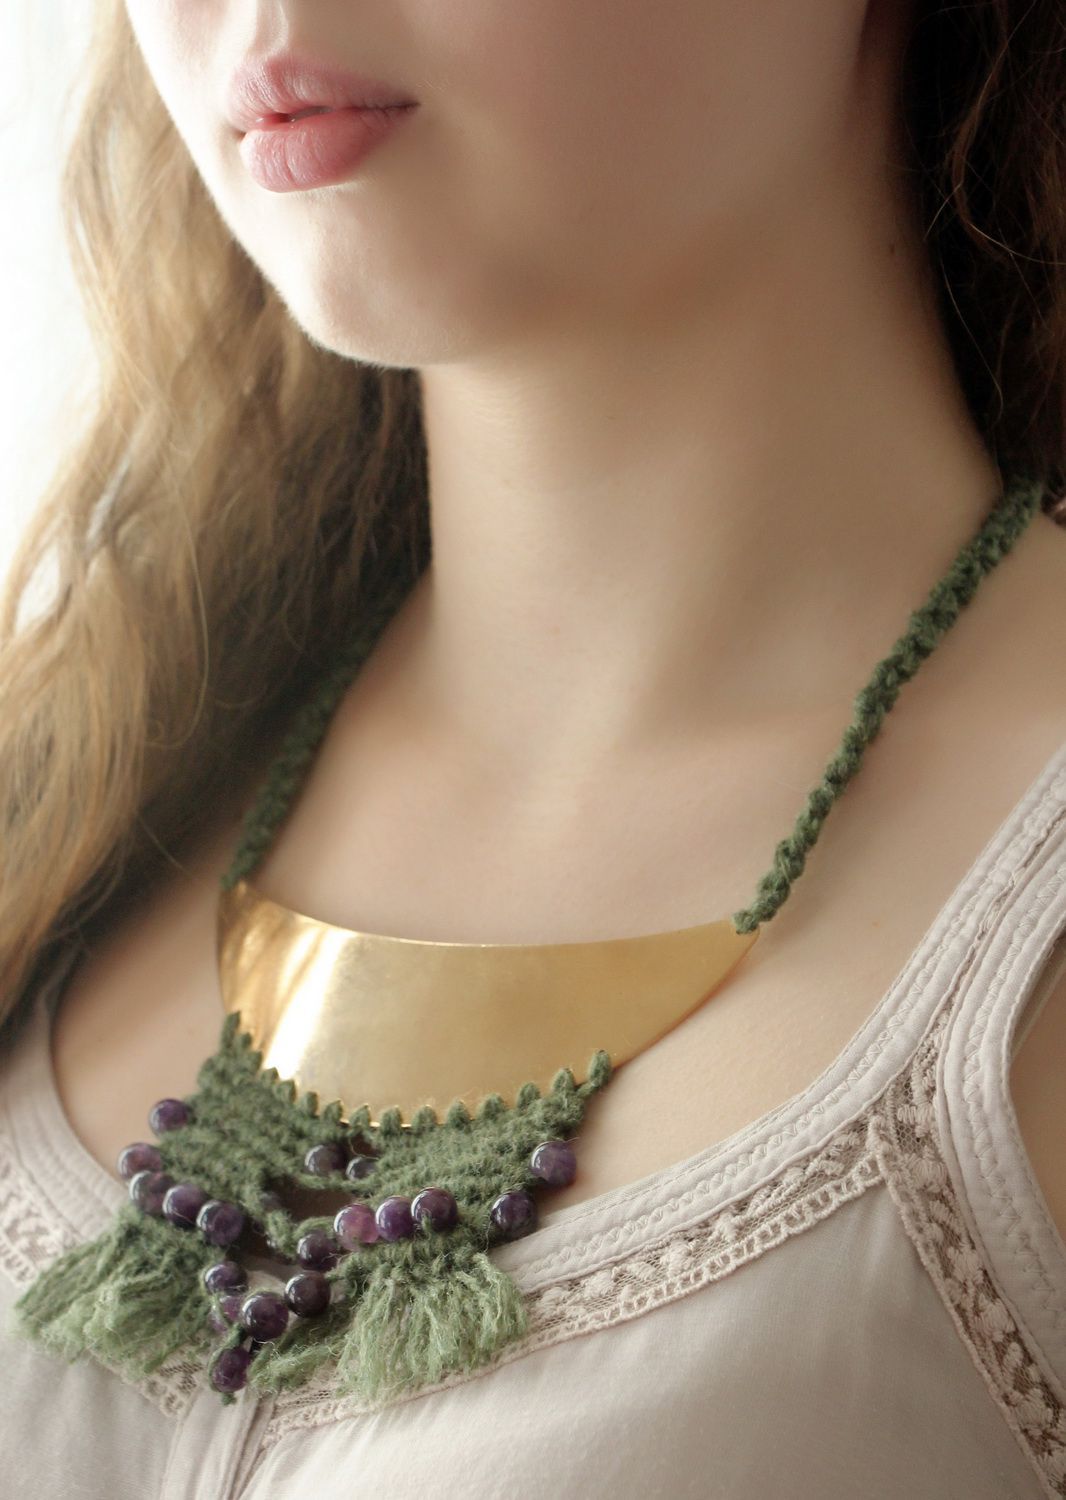 Ethnic necklace made from wool and amethyst photo 4